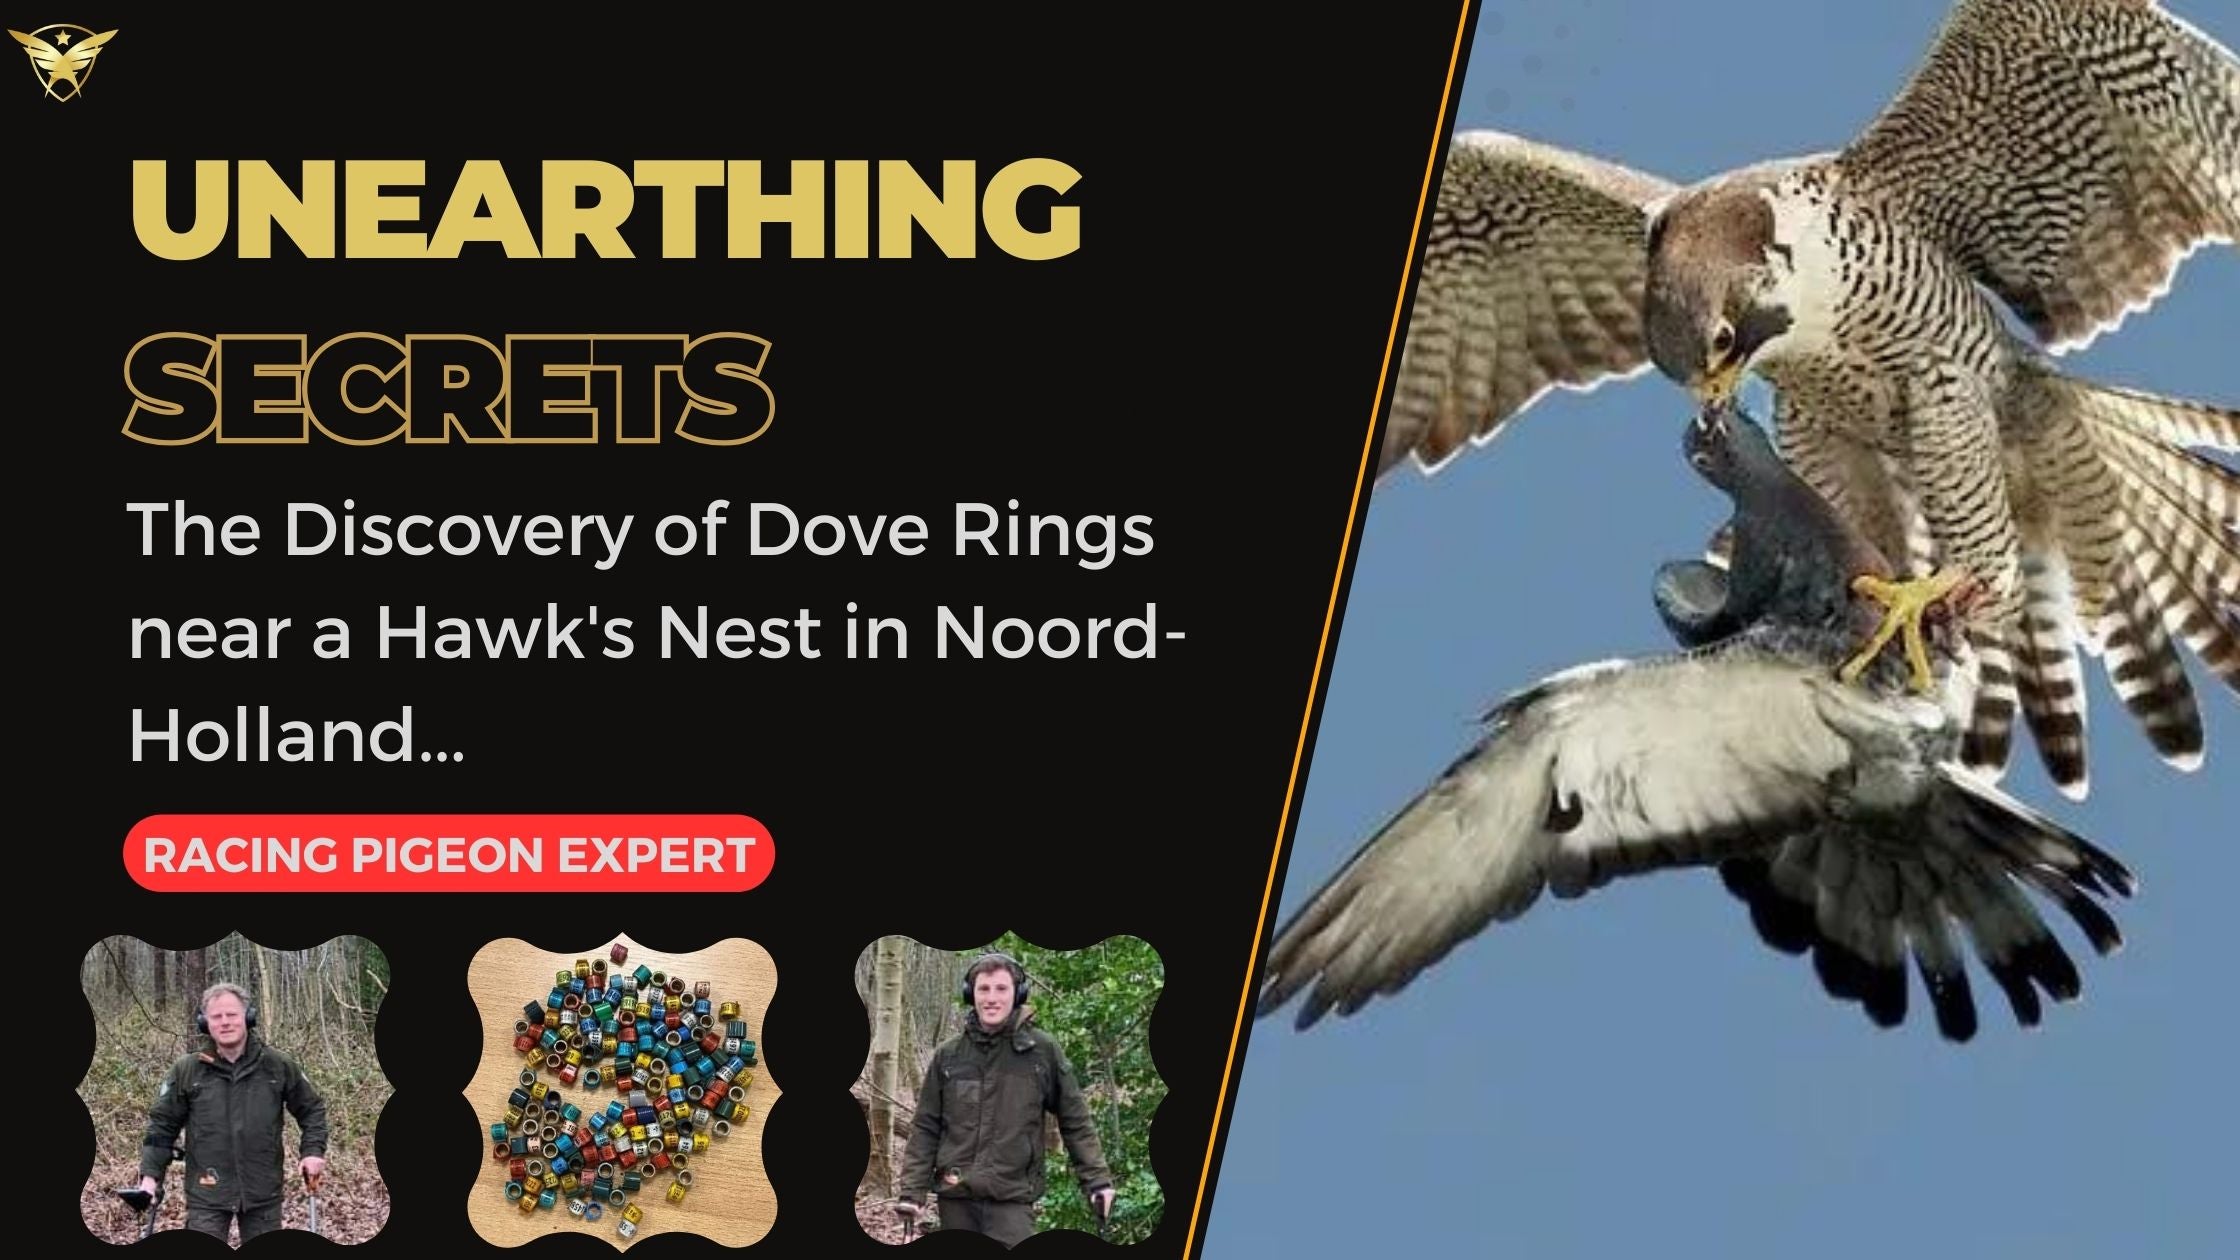 Unearthing Secrets: The Discovery of Dove Rings near a Hawk's Nest in Noord-Holland 